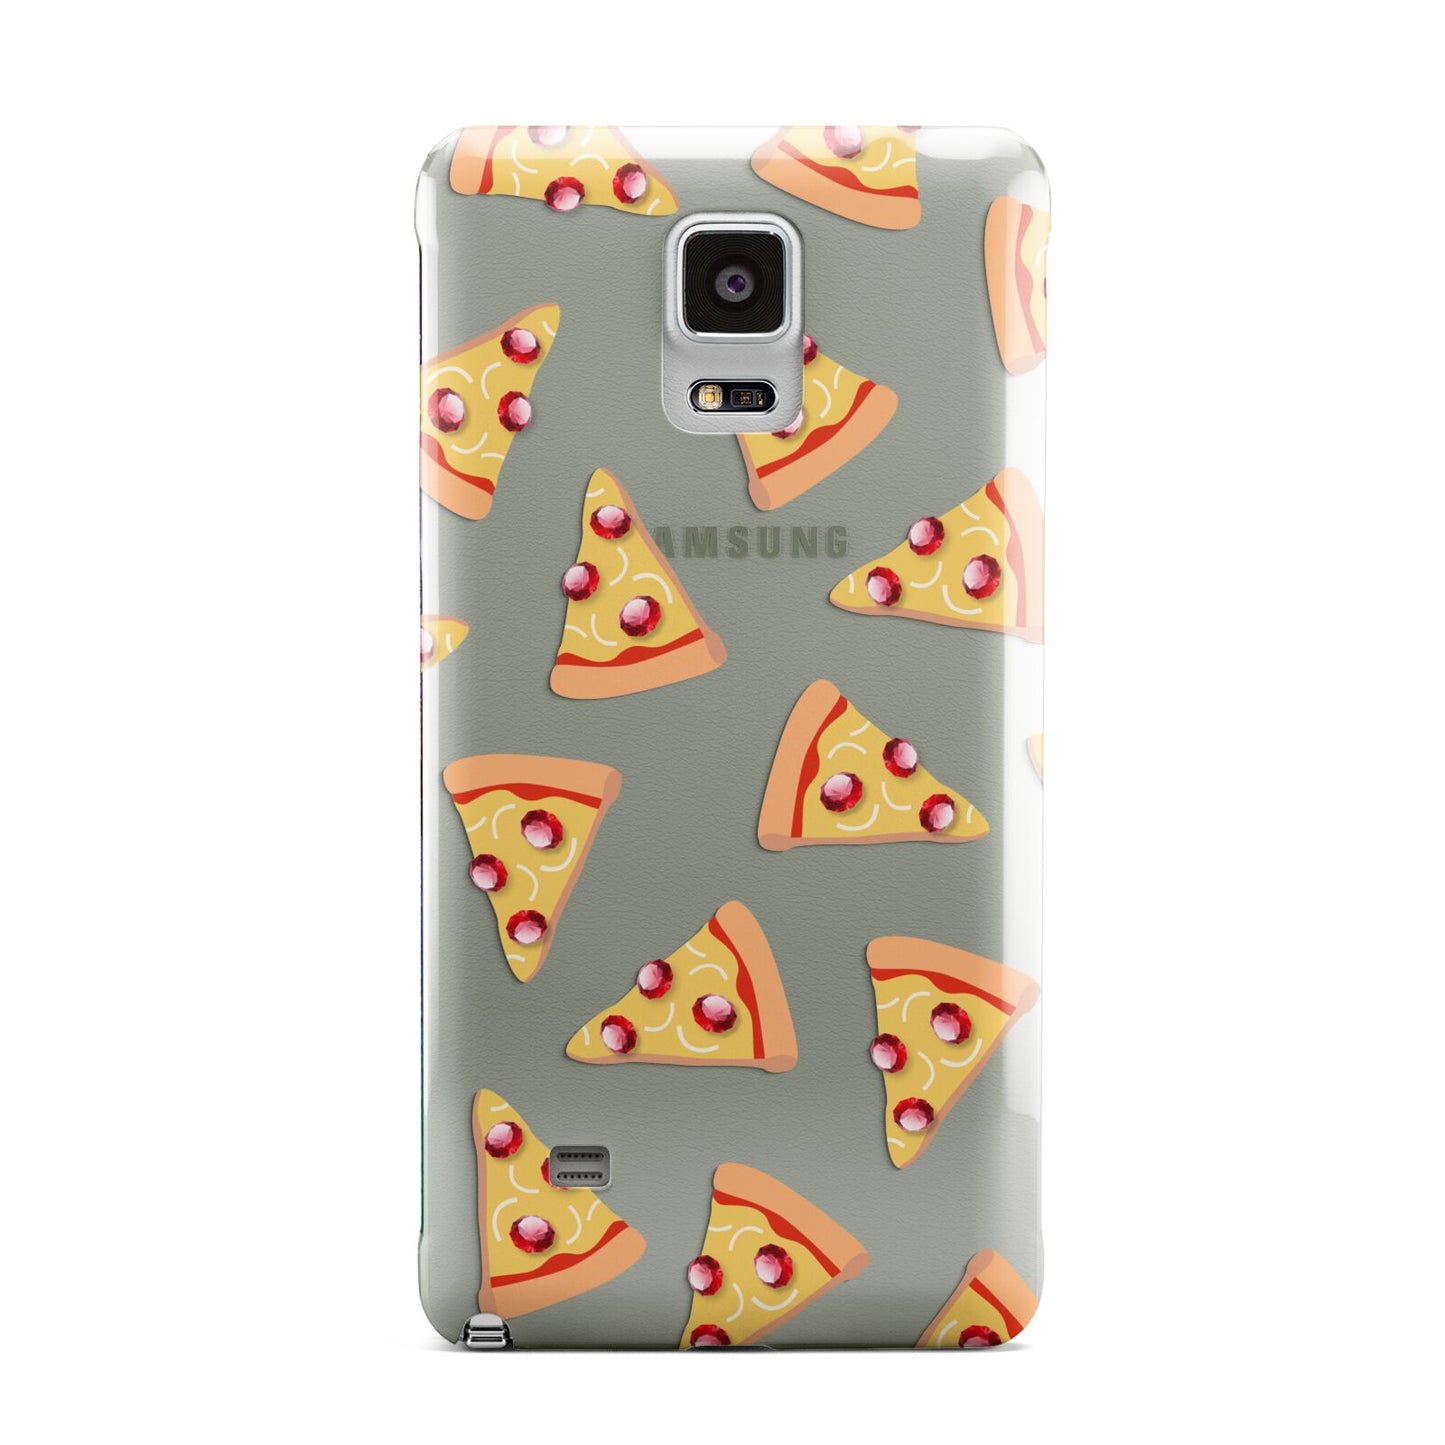 Rubies on Cartoon Pizza Slices Samsung Galaxy Note 4 Case